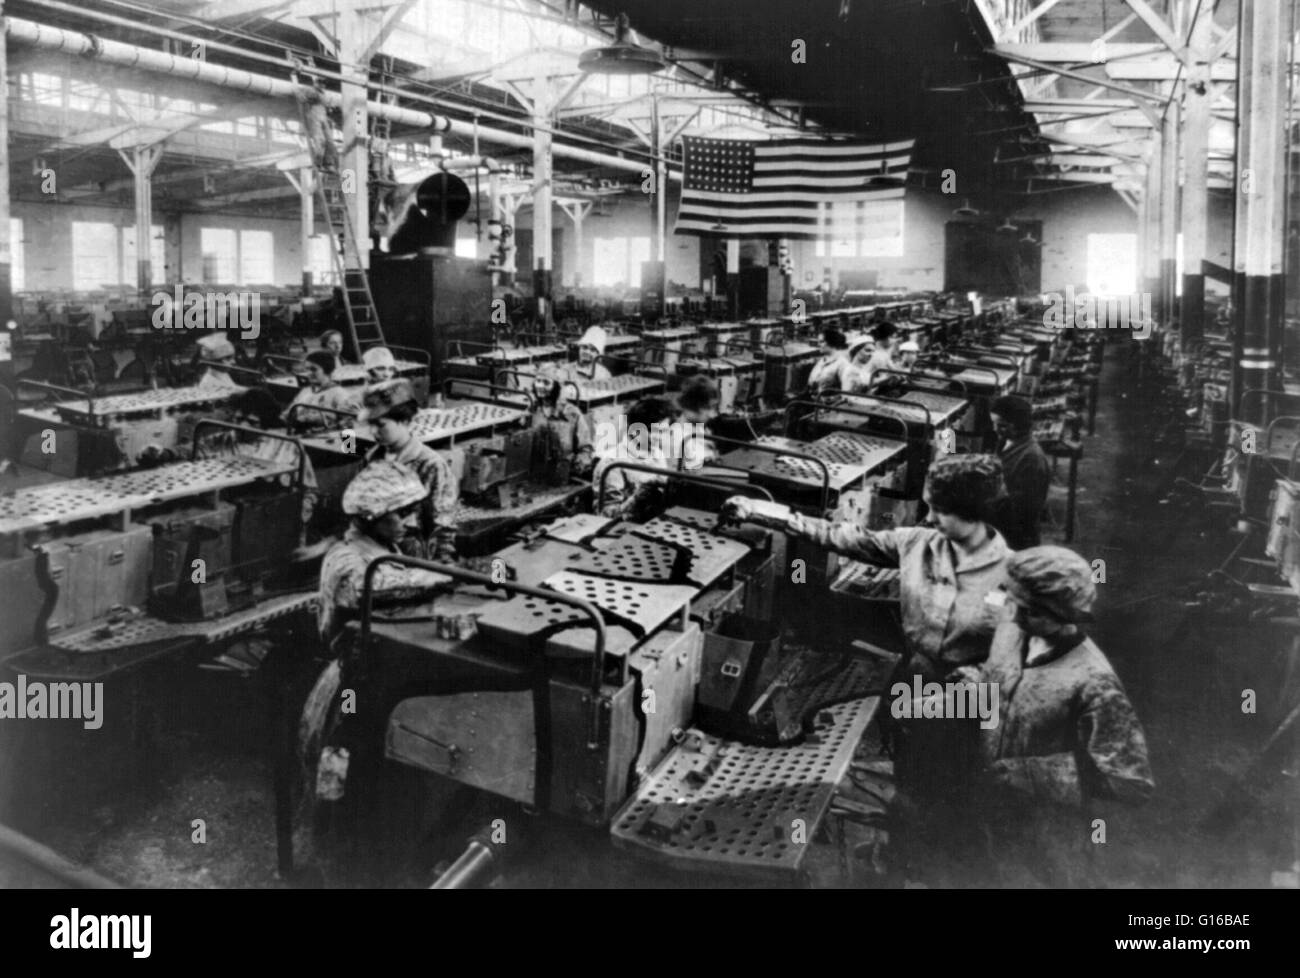 Entitled: Artillery vehicles - Camouflaging Department, American Car & Foundry Company, Detroit, Michigan. Showing women employees in ordnance plant during the first World War. U.S. Army Signal Corps photo circa 1914/18. During WWI, women started working Stock Photo